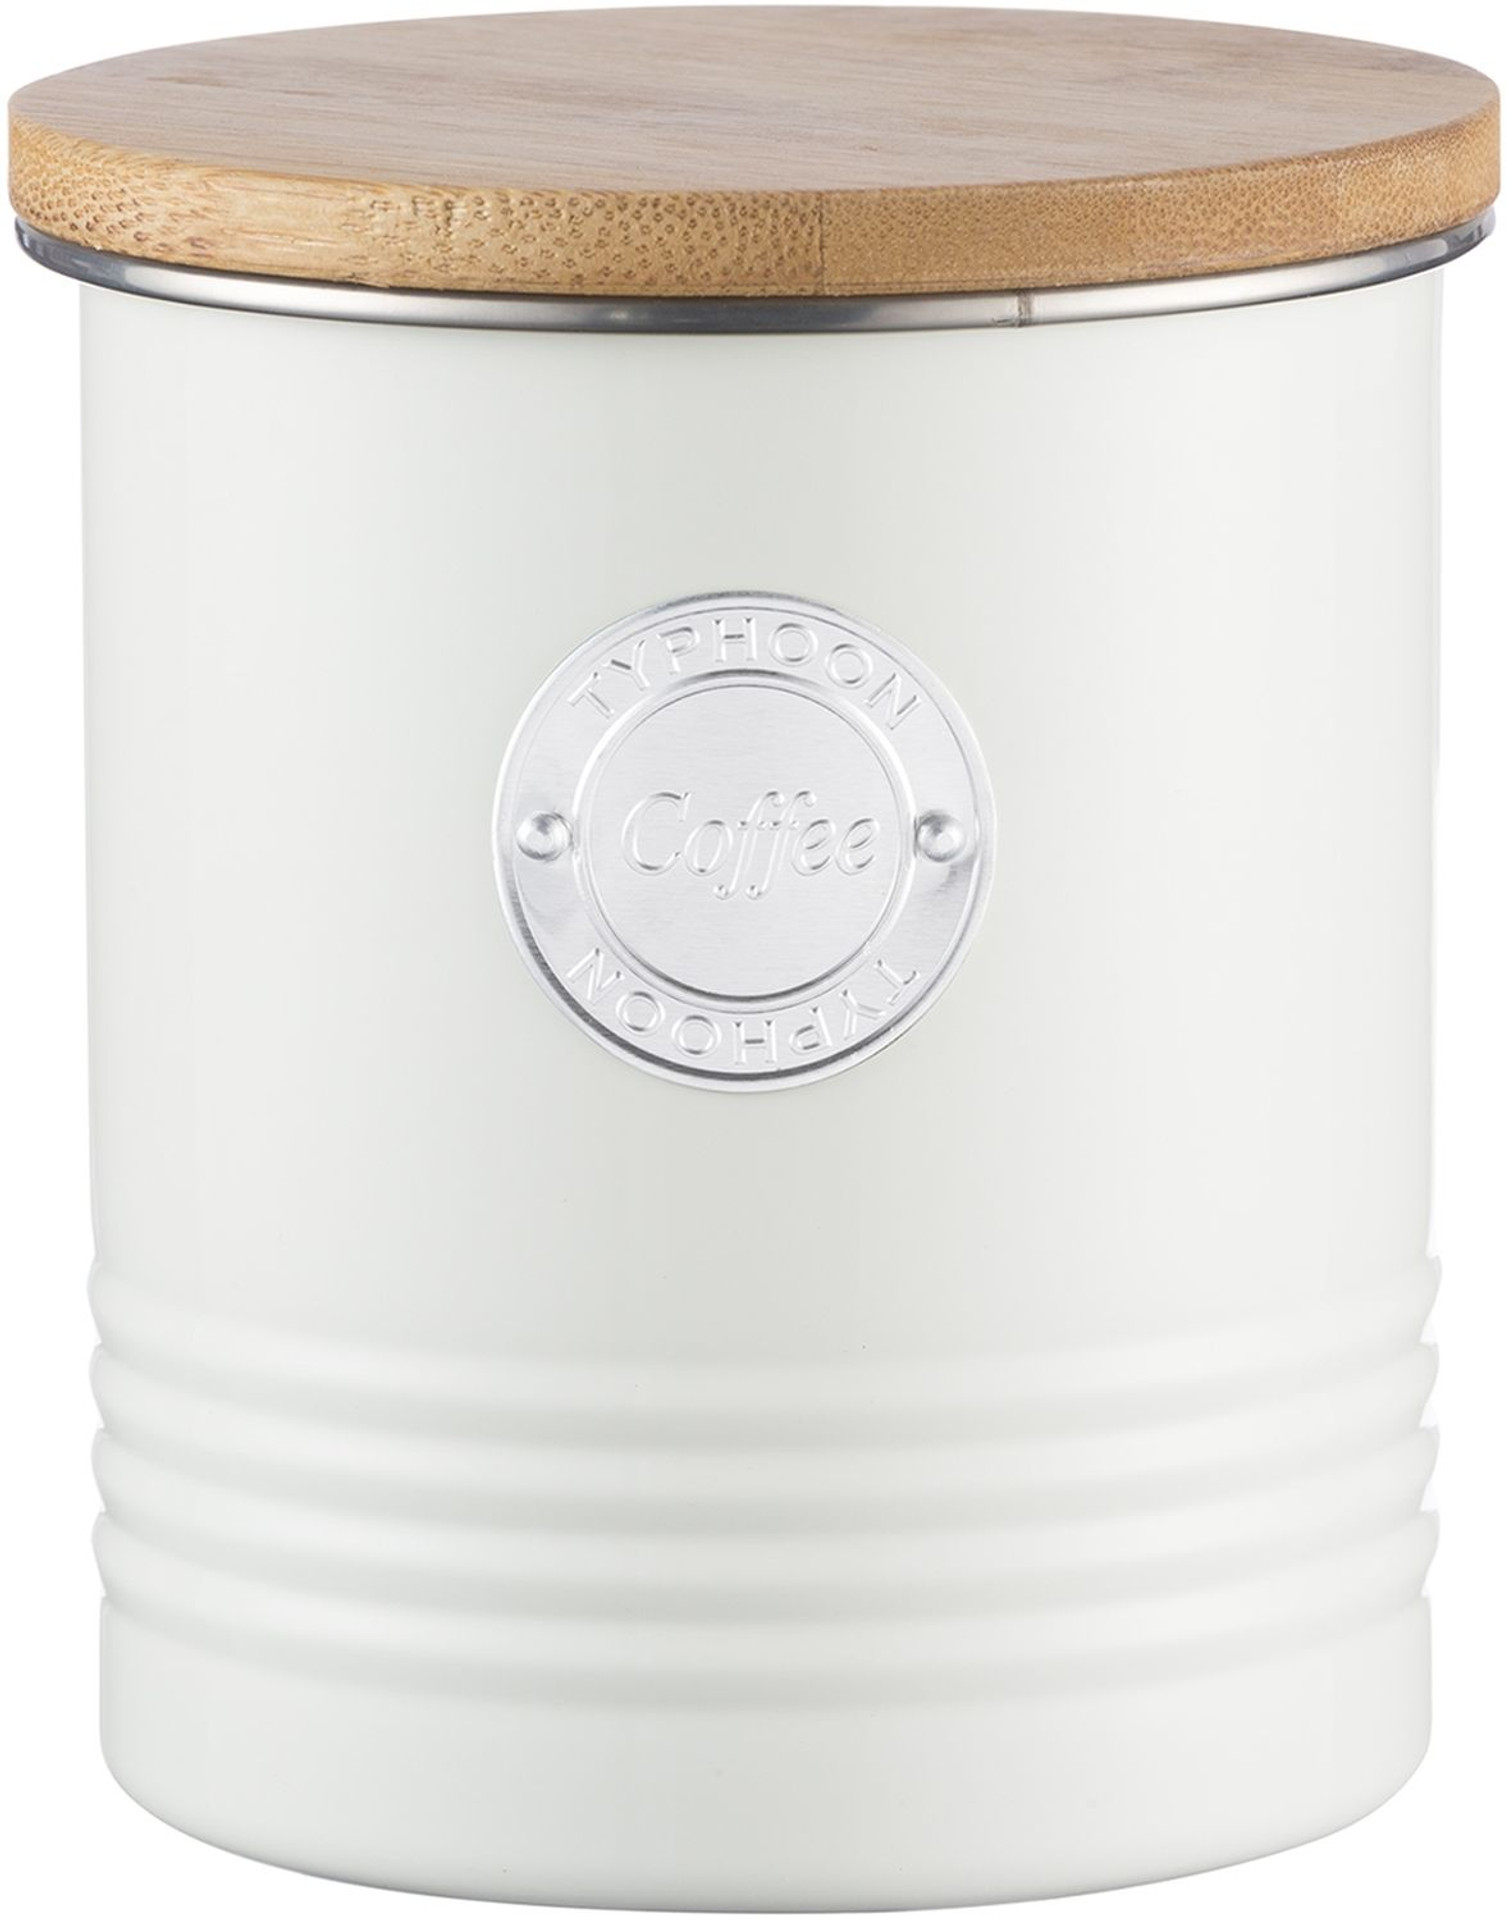 Typhoon 1Ltr Coffee Canister Cream